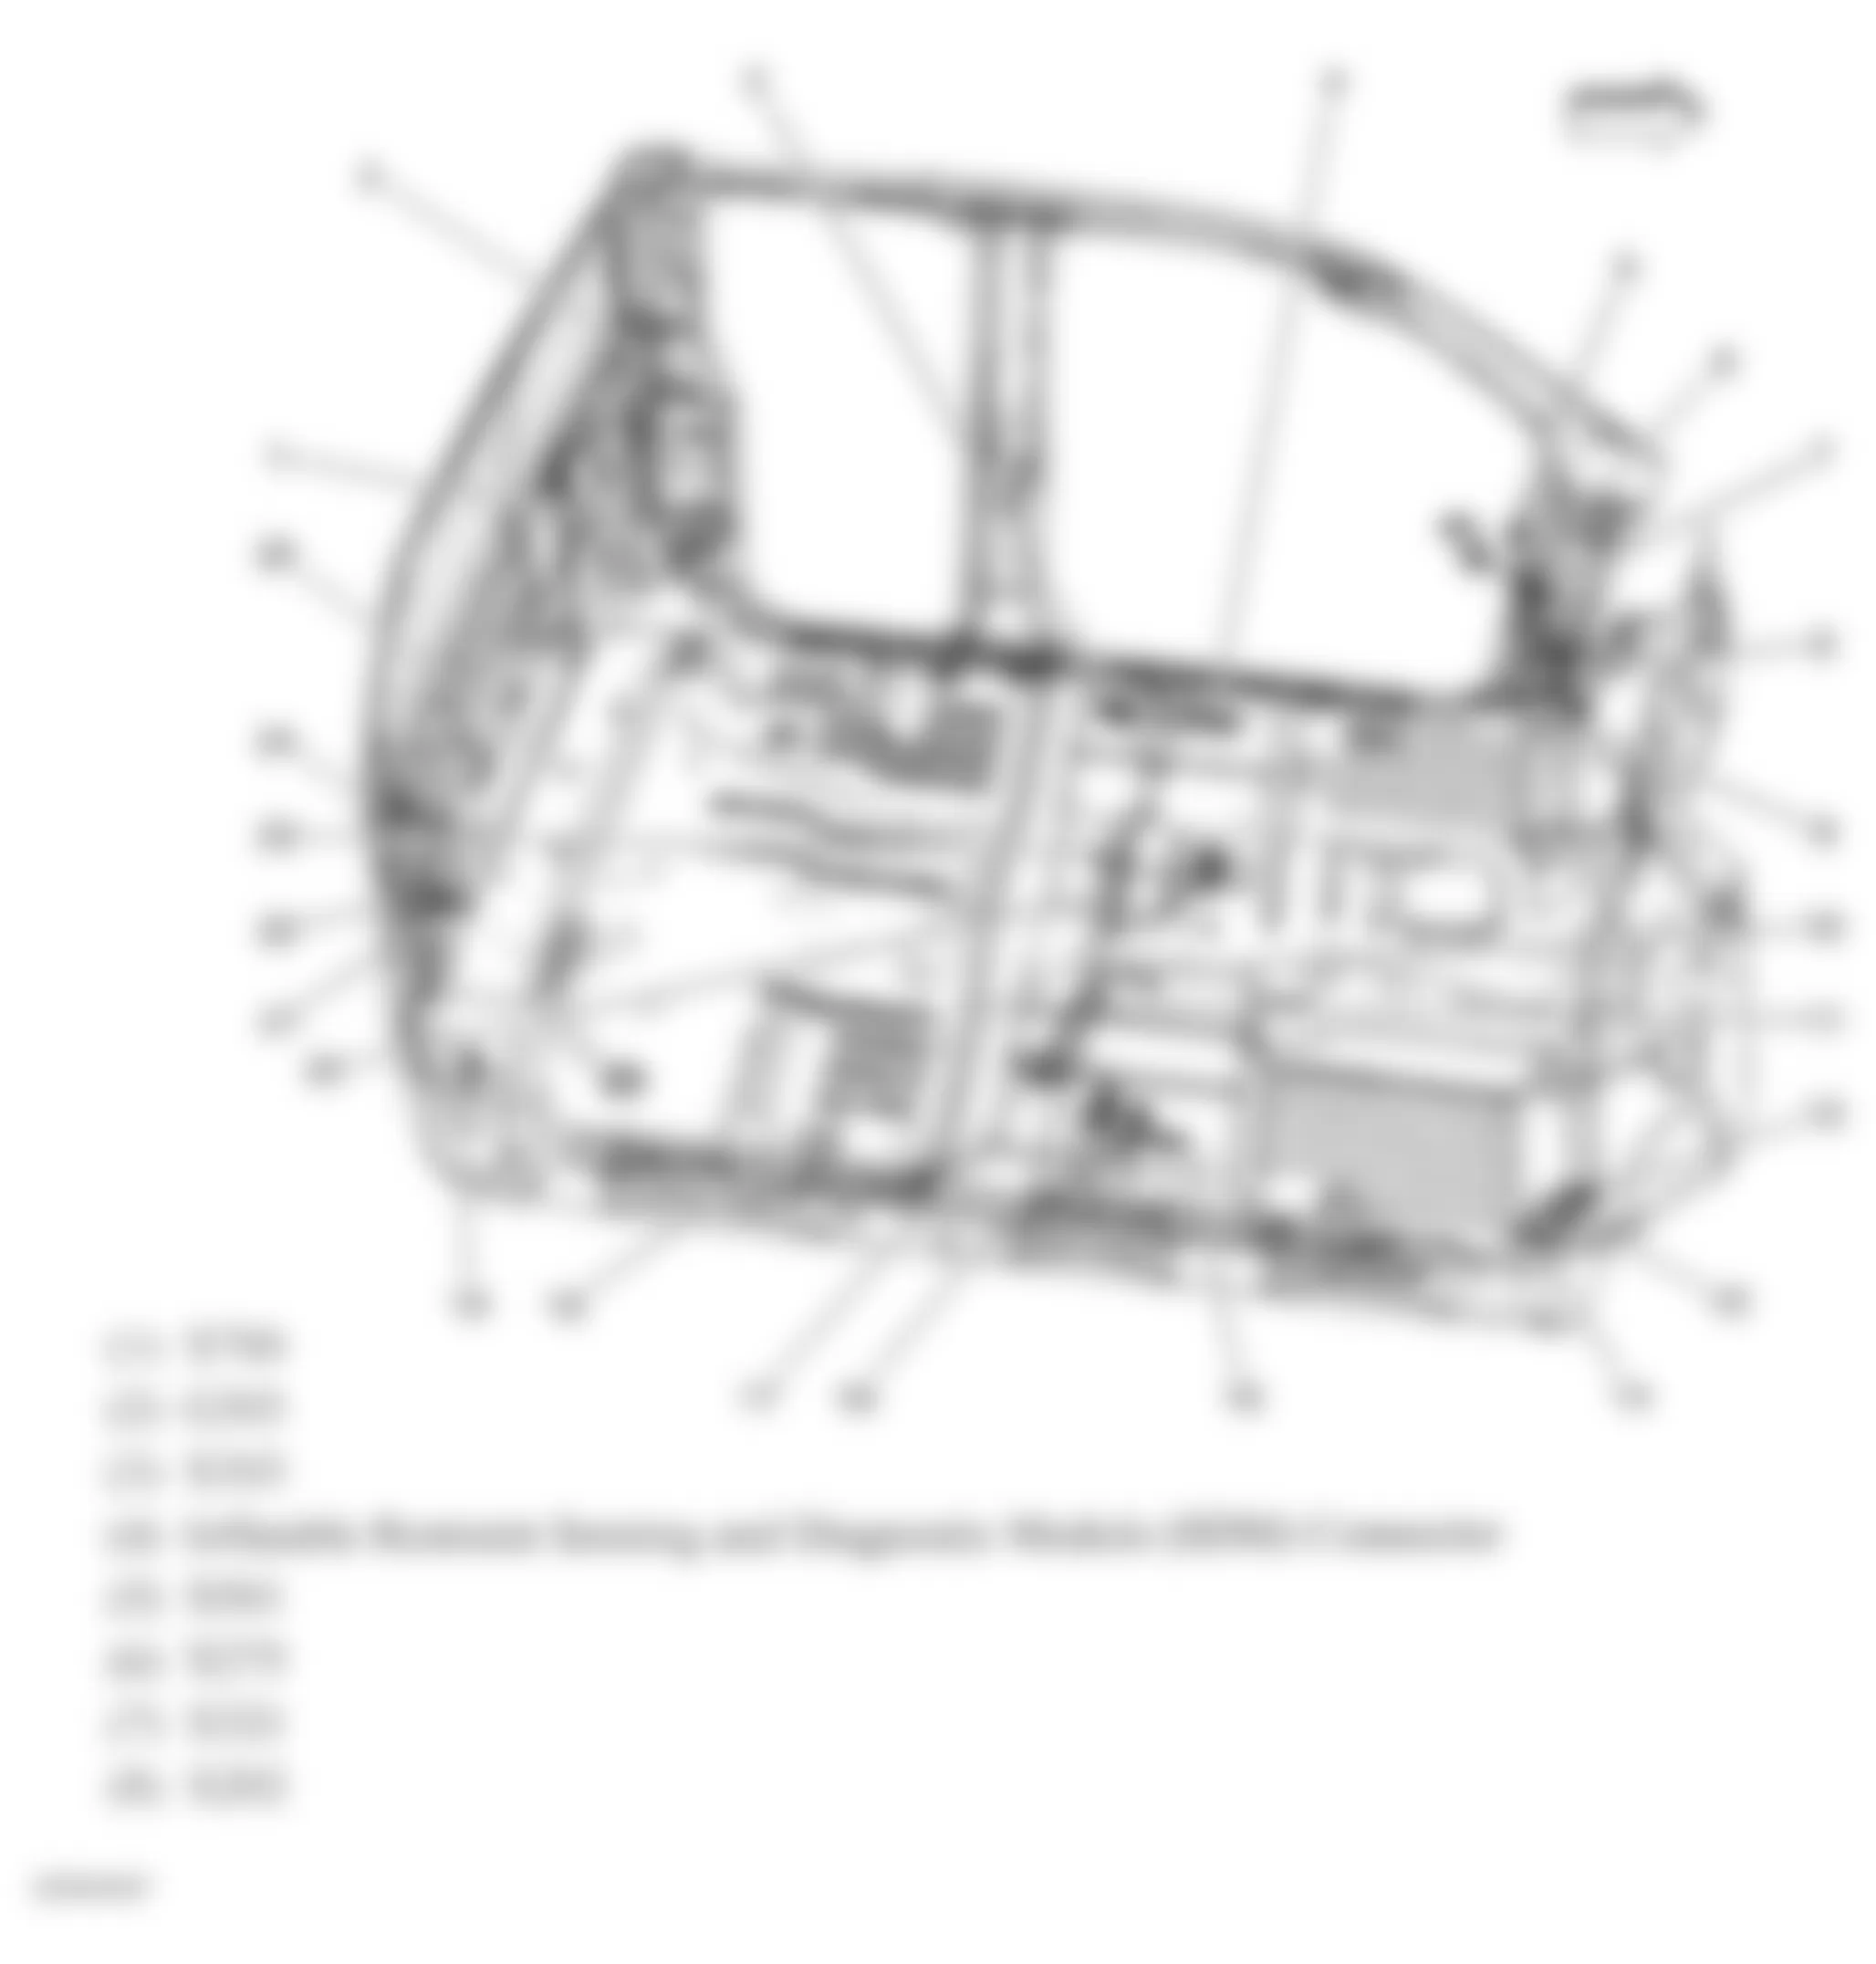 Chevrolet Silverado 1500 2007 - Component Locations -  Passenger Compartment (Extended Cab) (1 Of 2)